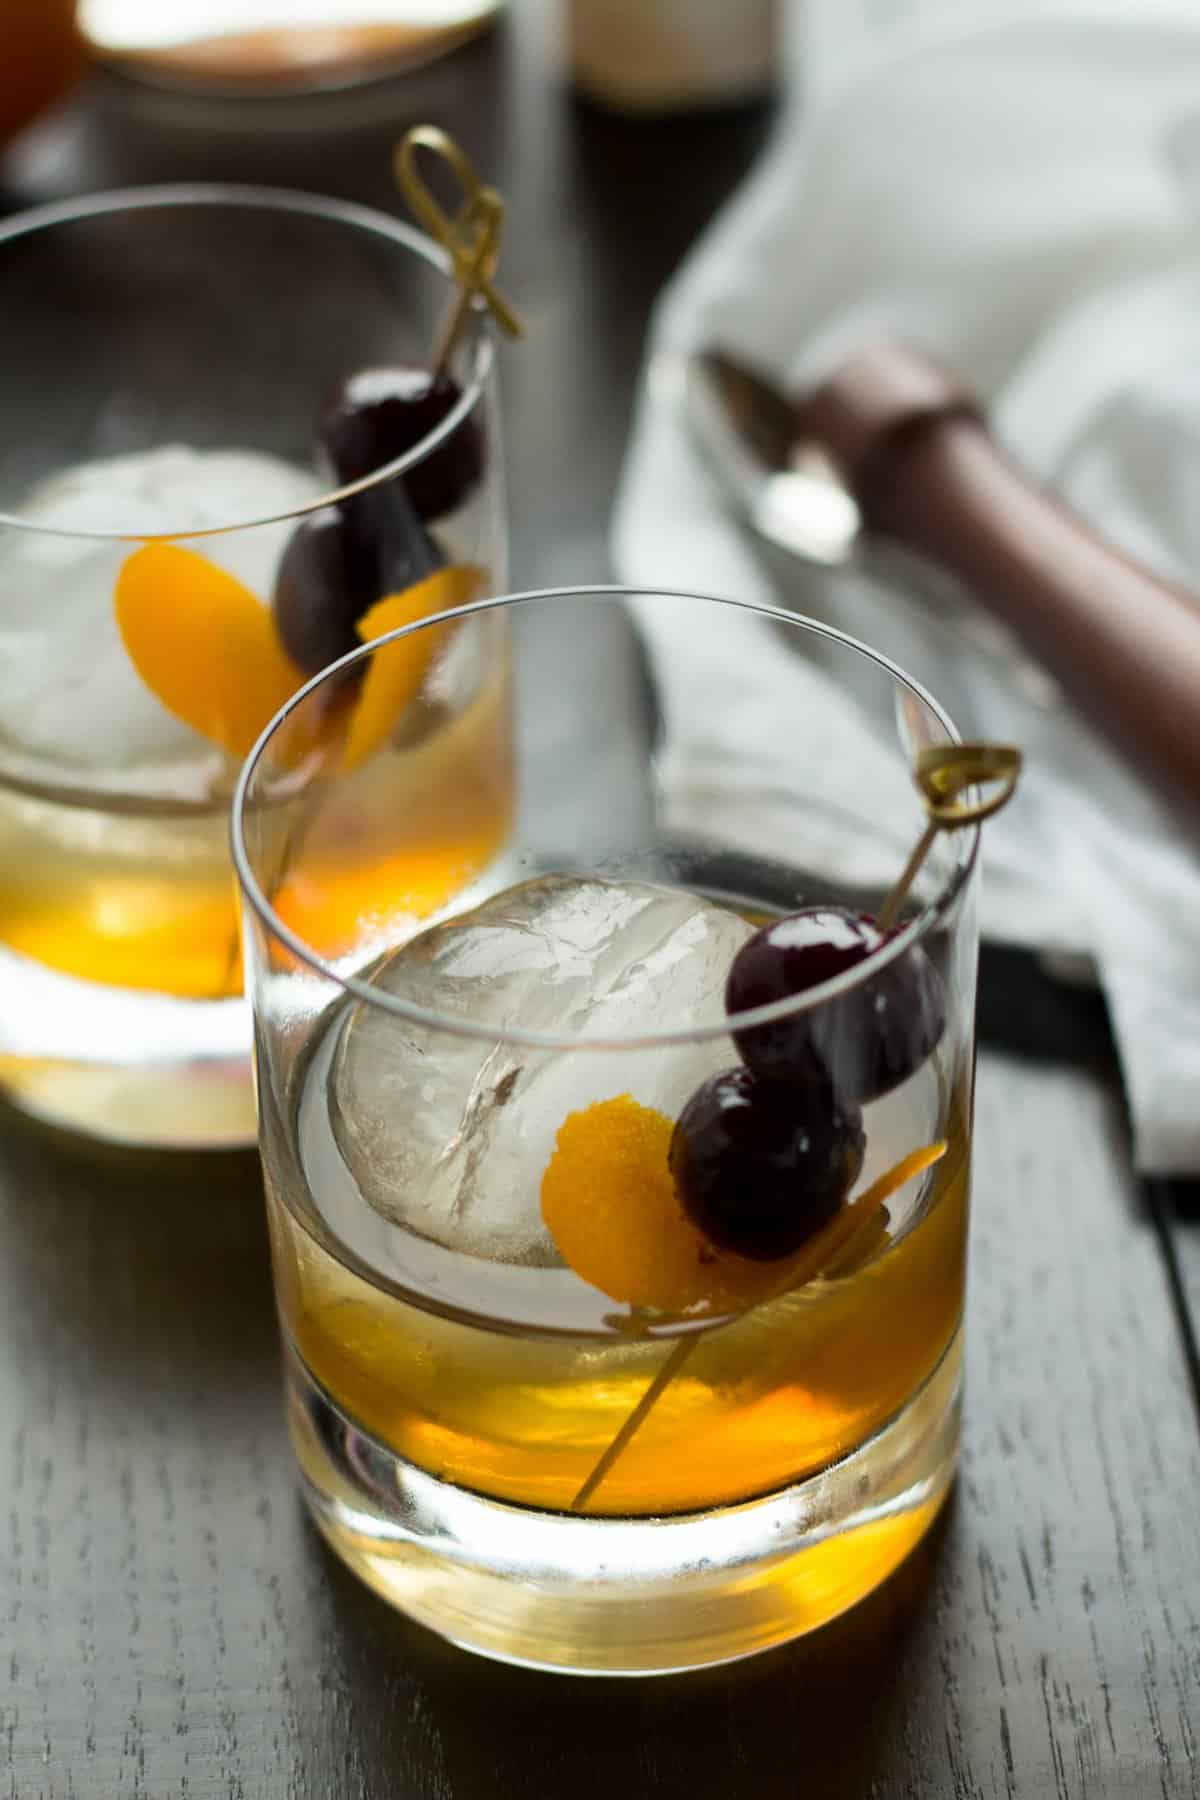 This twist on the classic old fashioned uses apple whiskey to make a totally enjoyable cocktail. Whether you are a new or experienced whiskey drinker, you will love this cocktail!